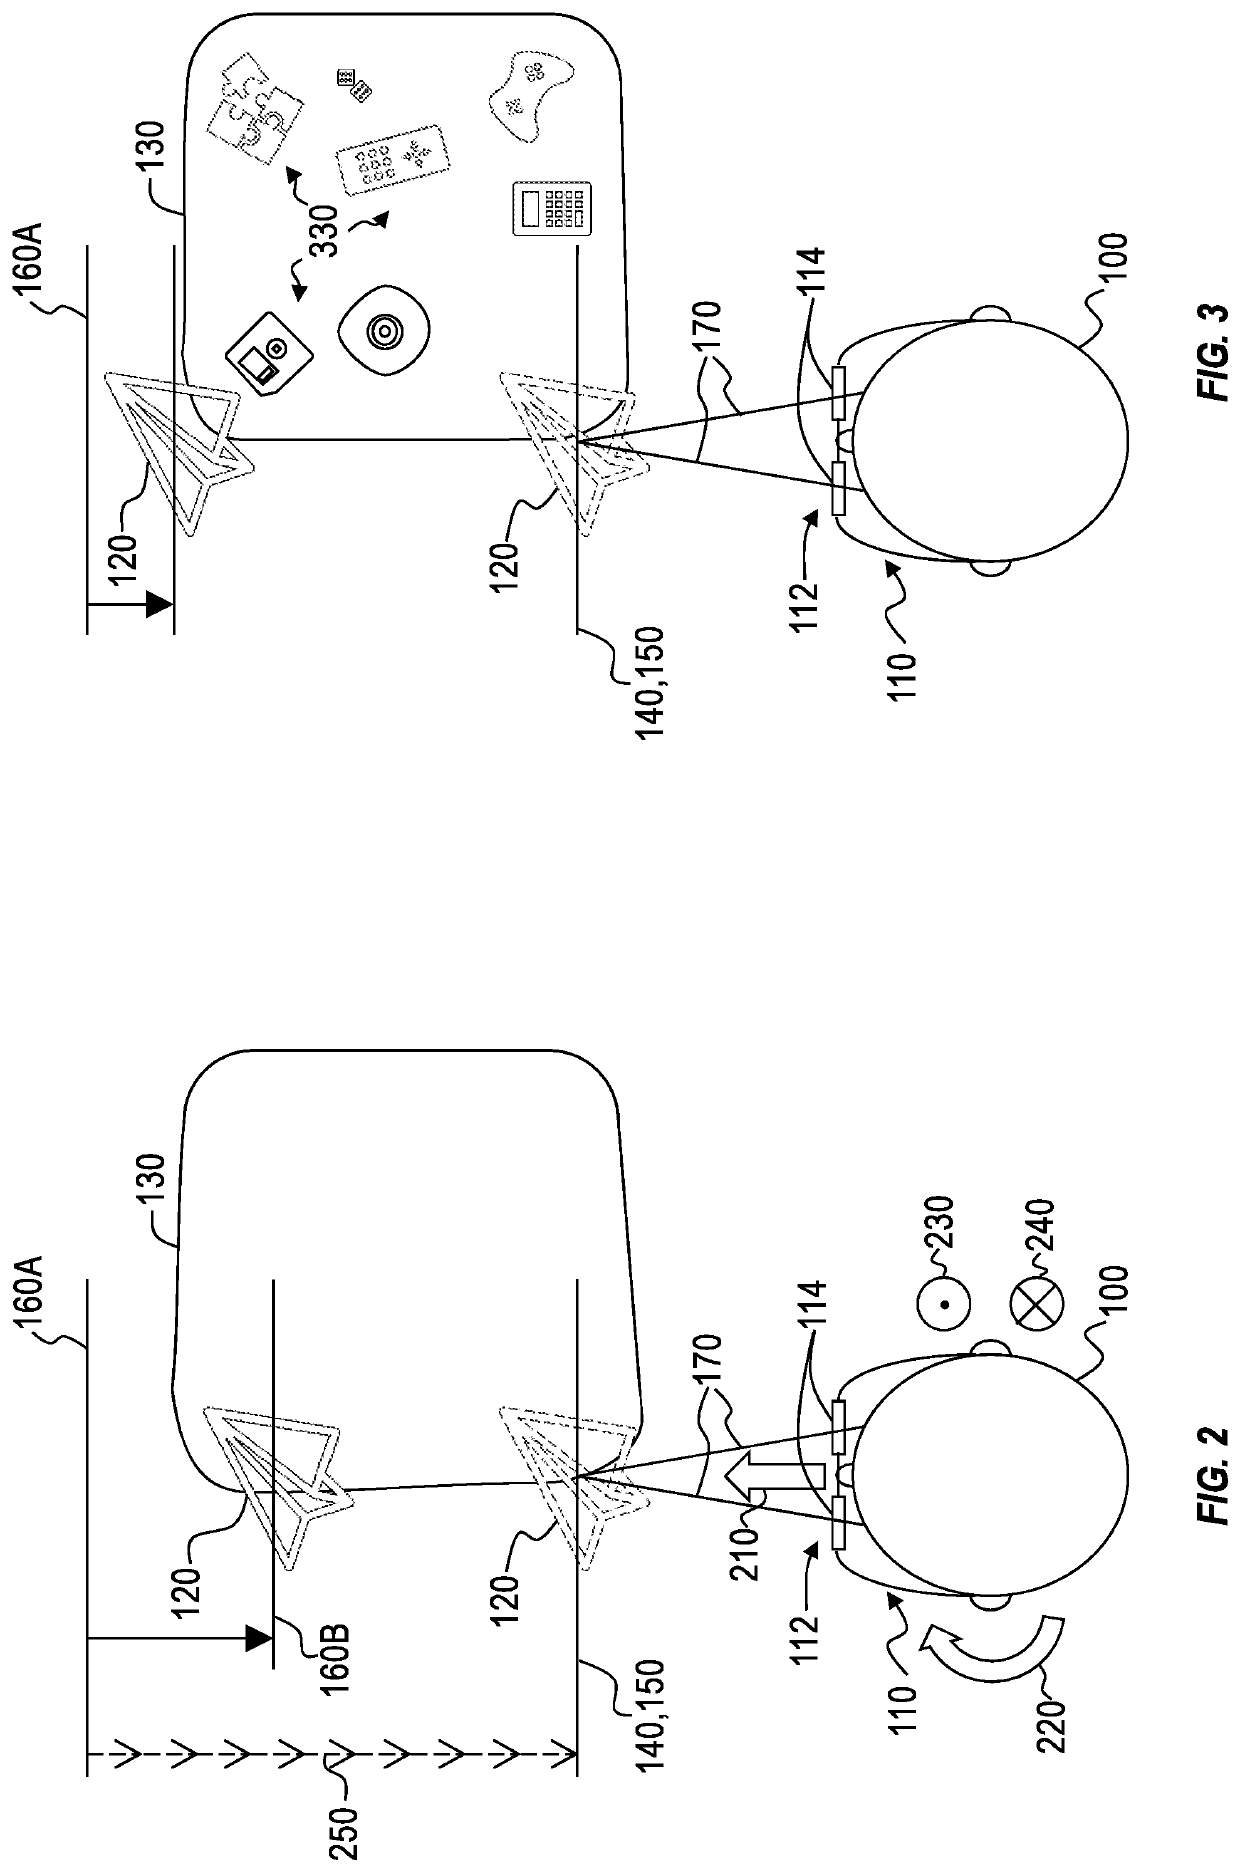 Automated variable-focus lens control to reduce user discomfort in a head-mounted display